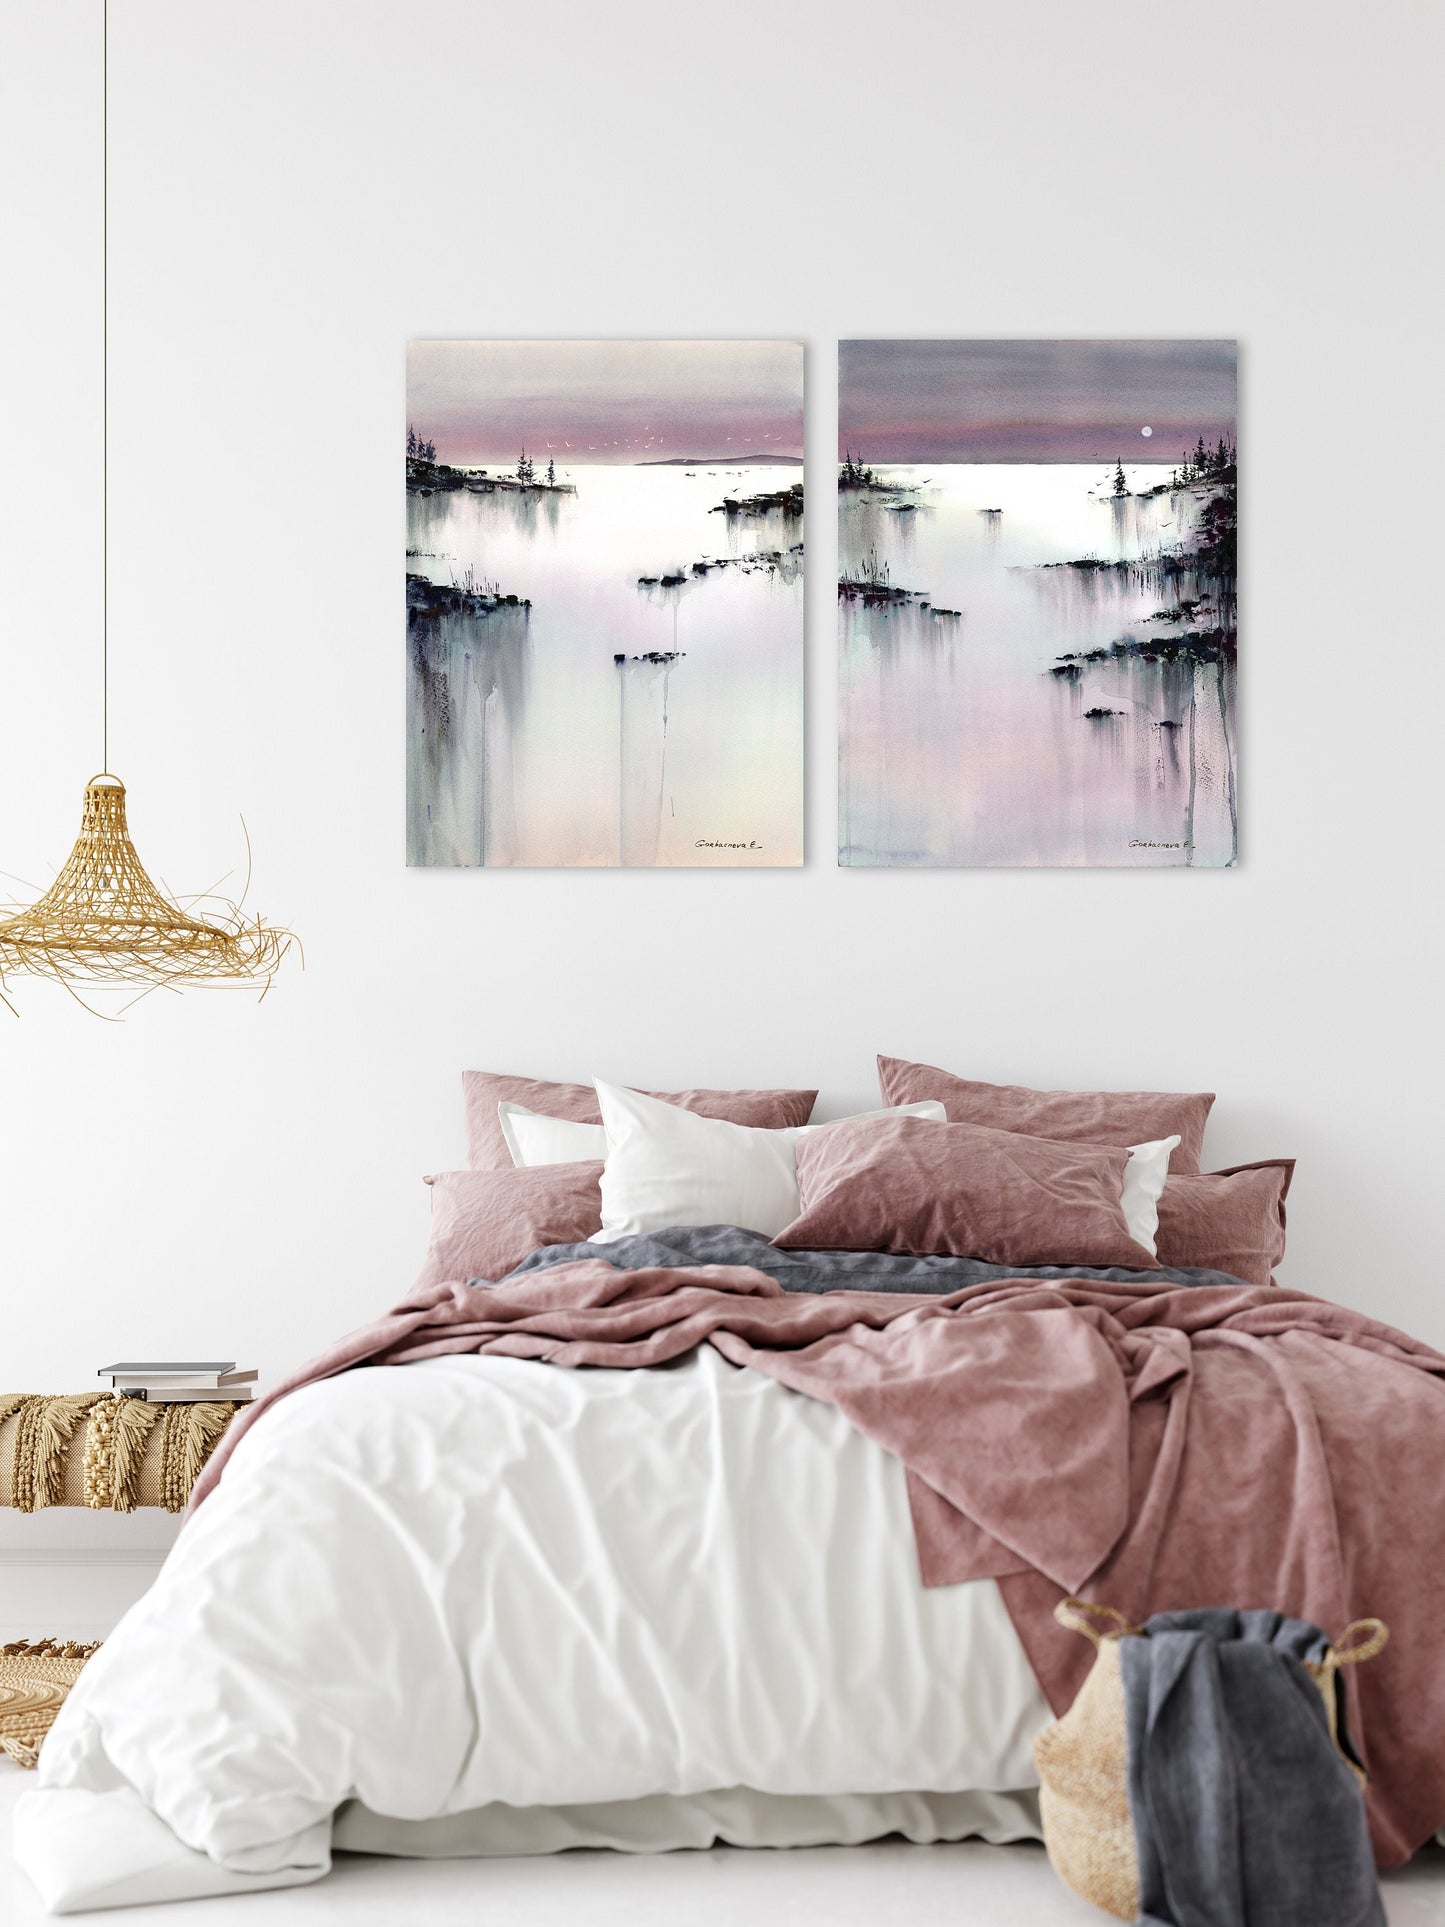 Abstract Nature Set of 2 Art Prints, Contemporary Wall Art, Pink, Grey, Bedroom Decor, Giclee Canvas Prints, Moving Gift